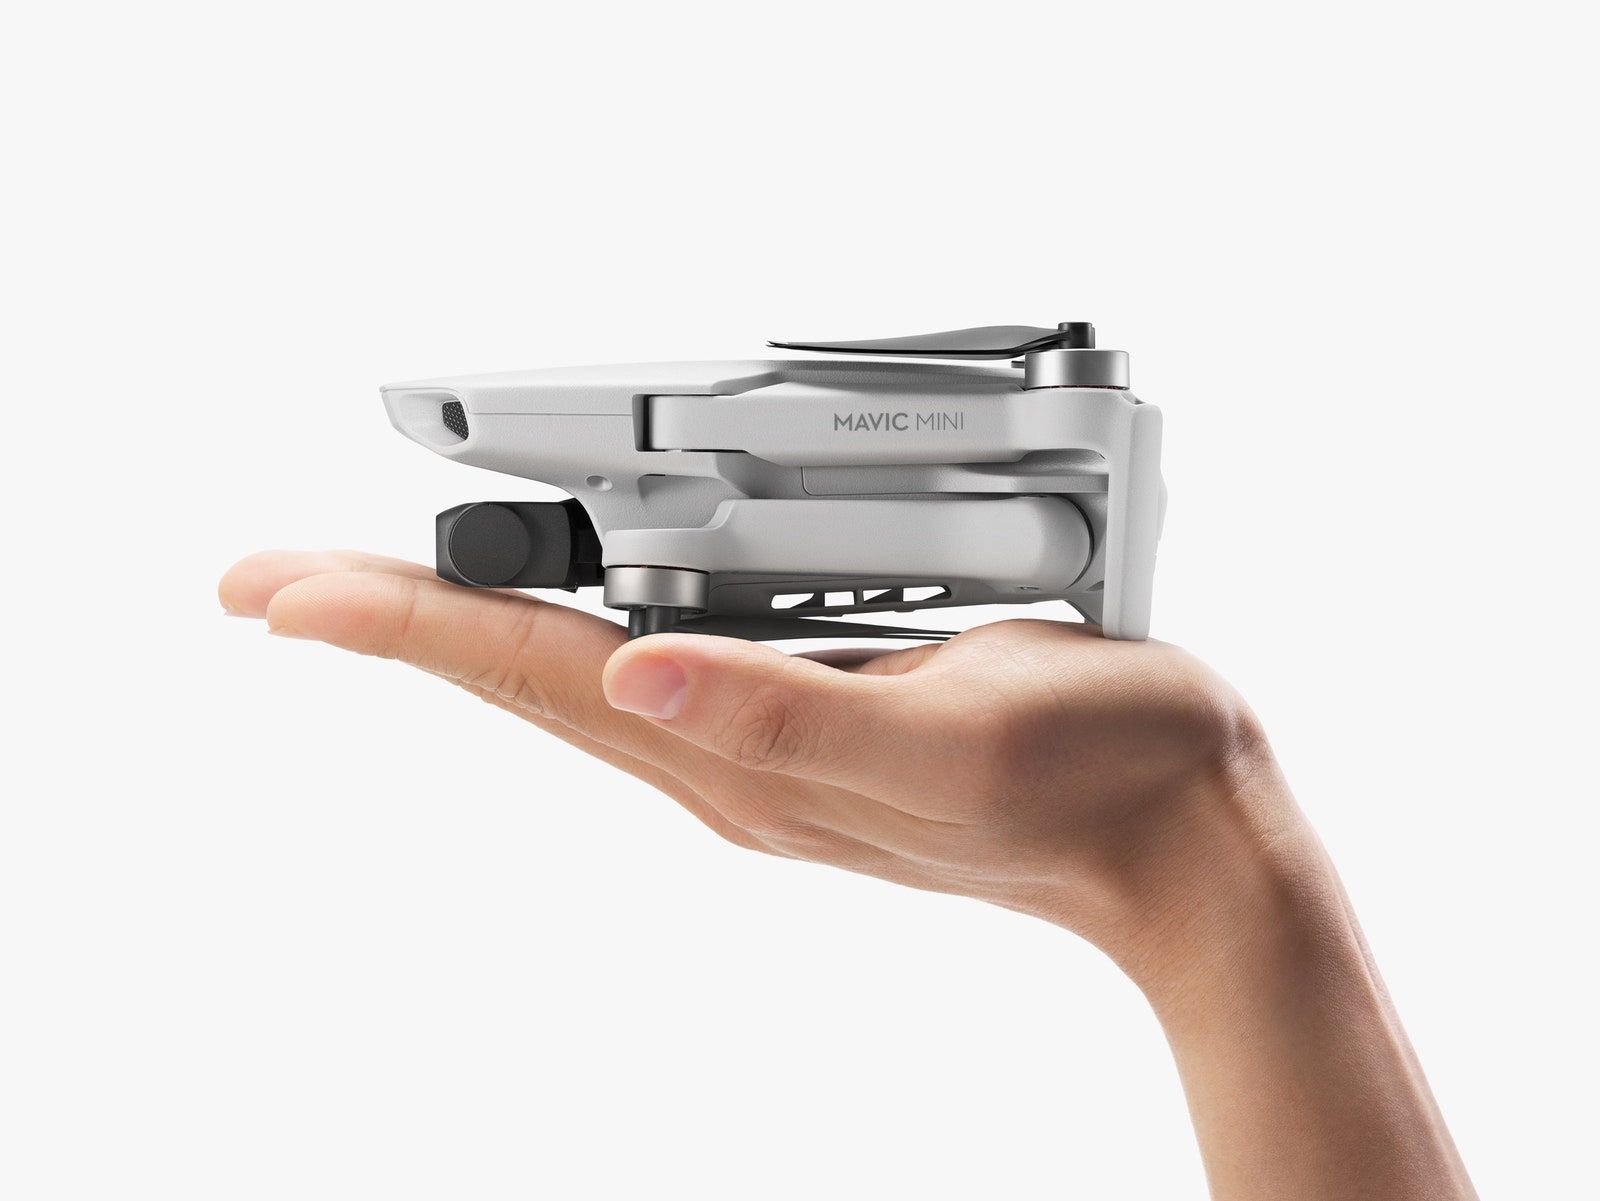 dji mini 2 hold in hand under 250g history